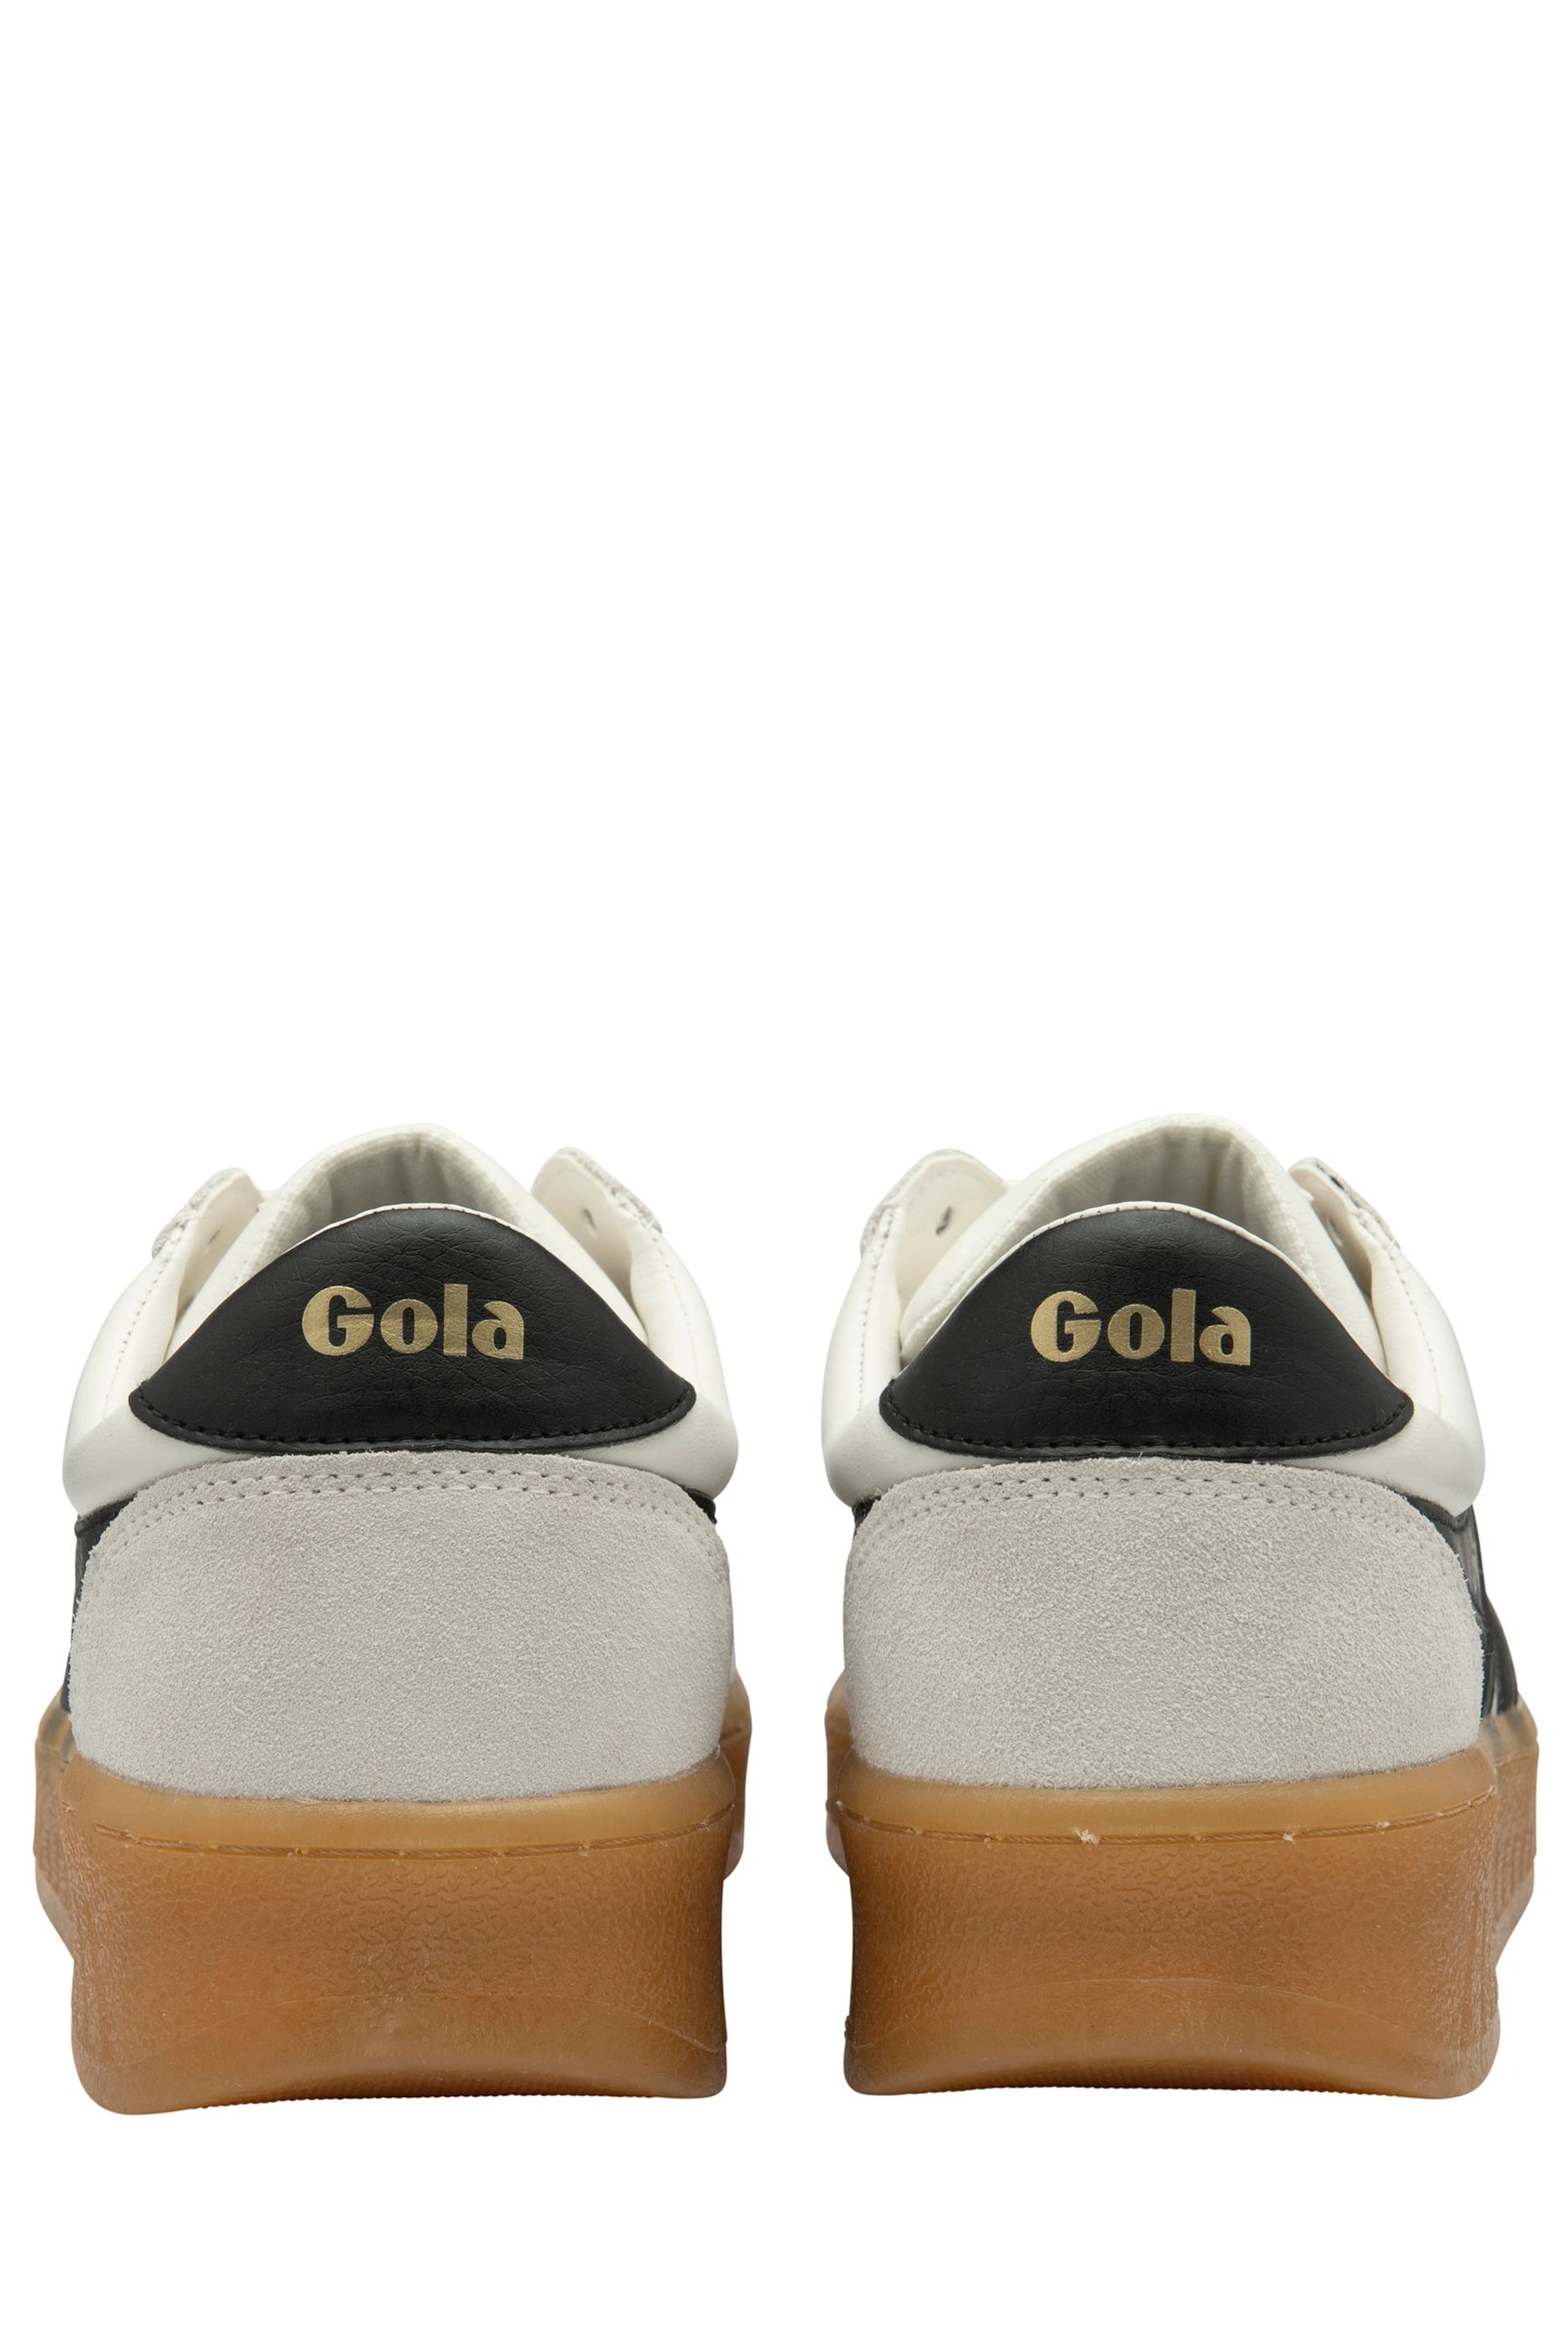 Gola White Mens Grandslam Elite Leather Lace-Up Trainers - Image 3 of 4